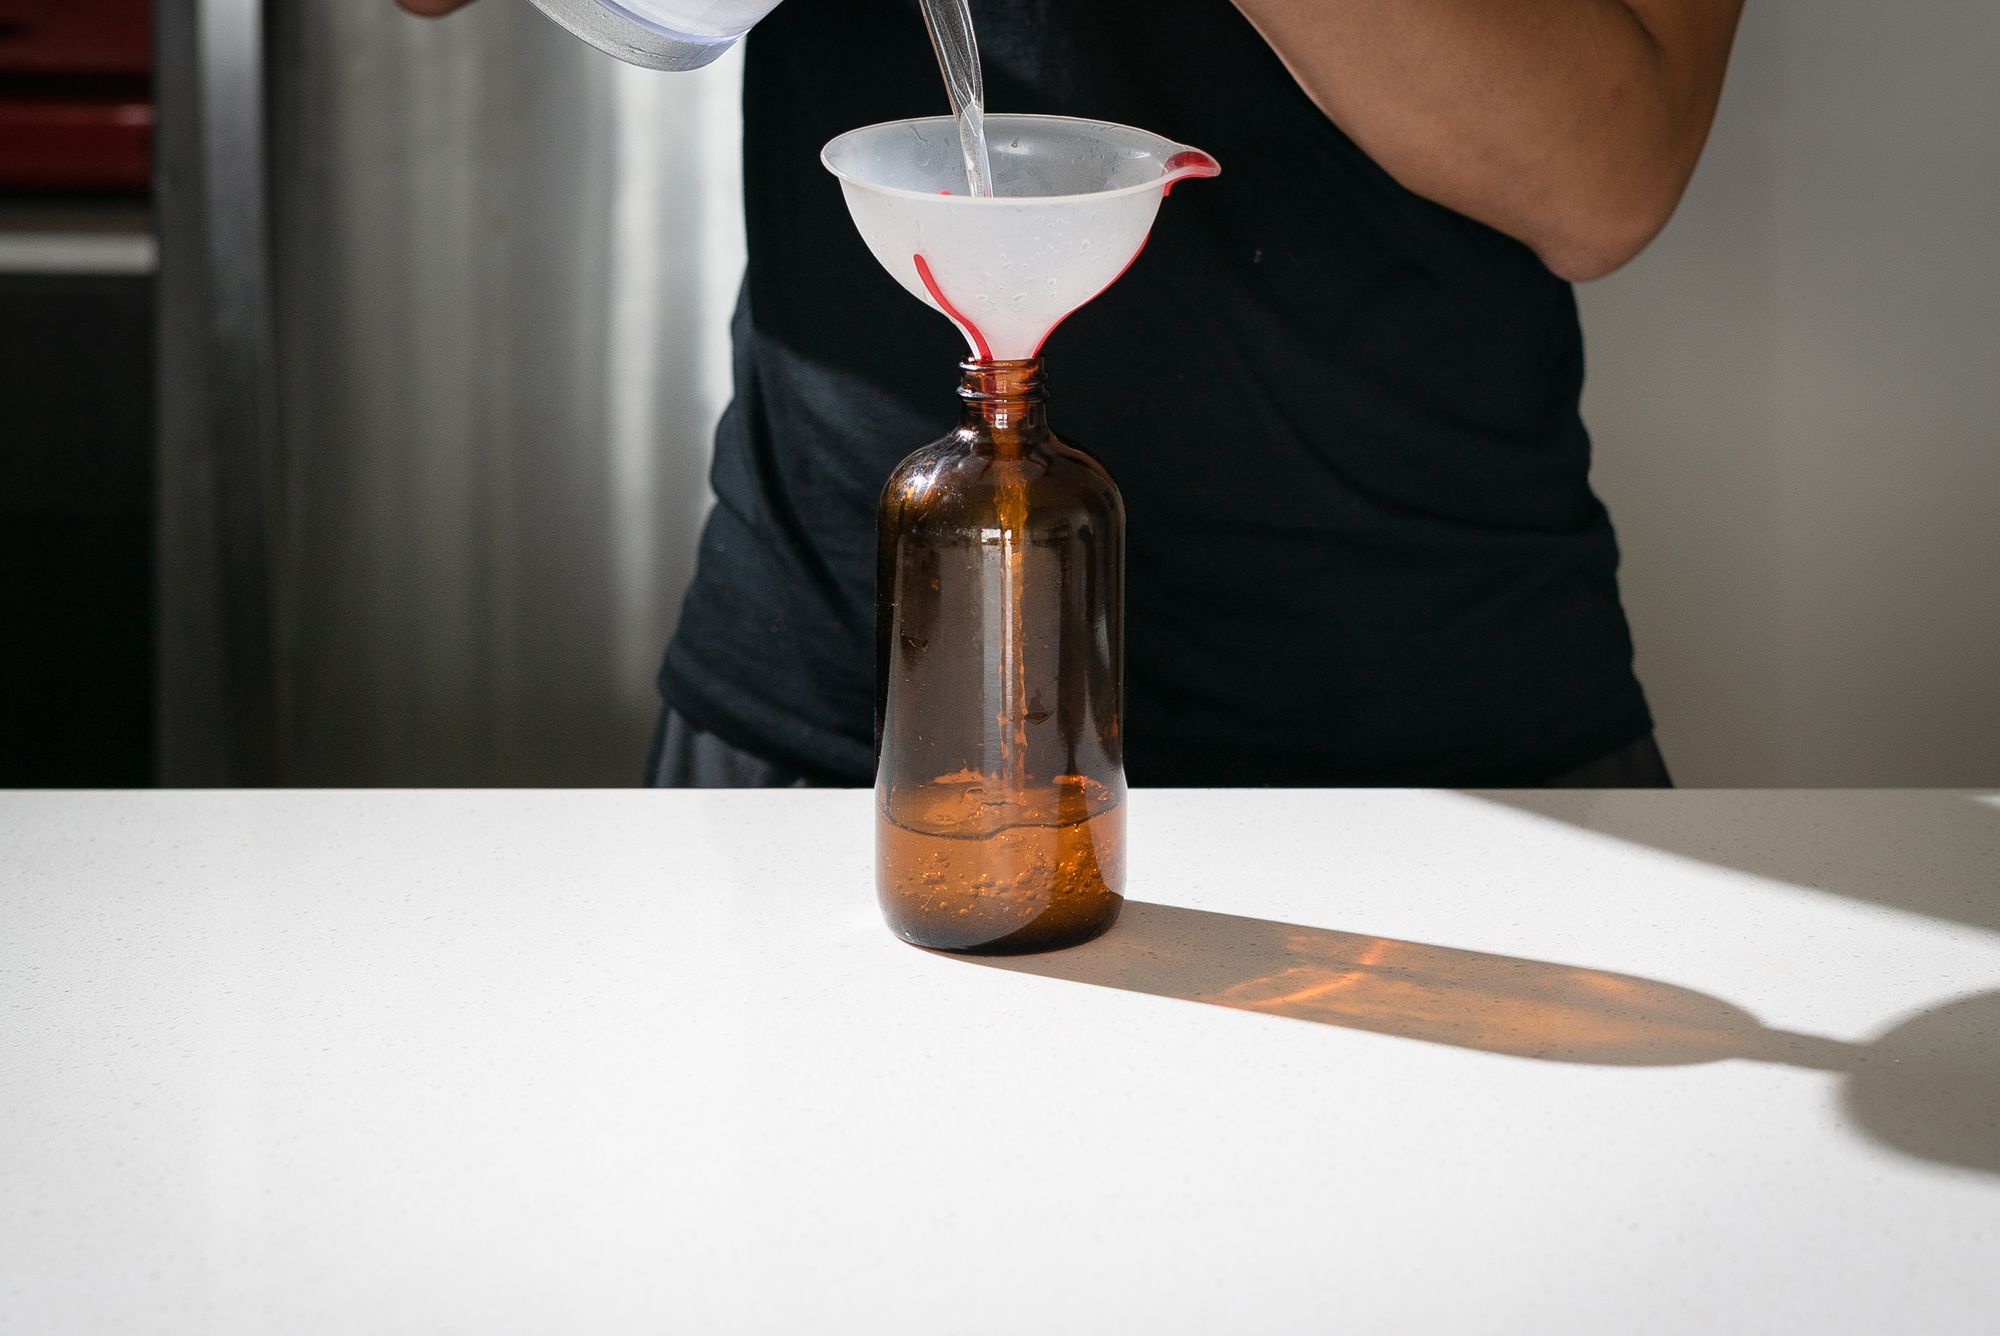 pour simple syrup into container